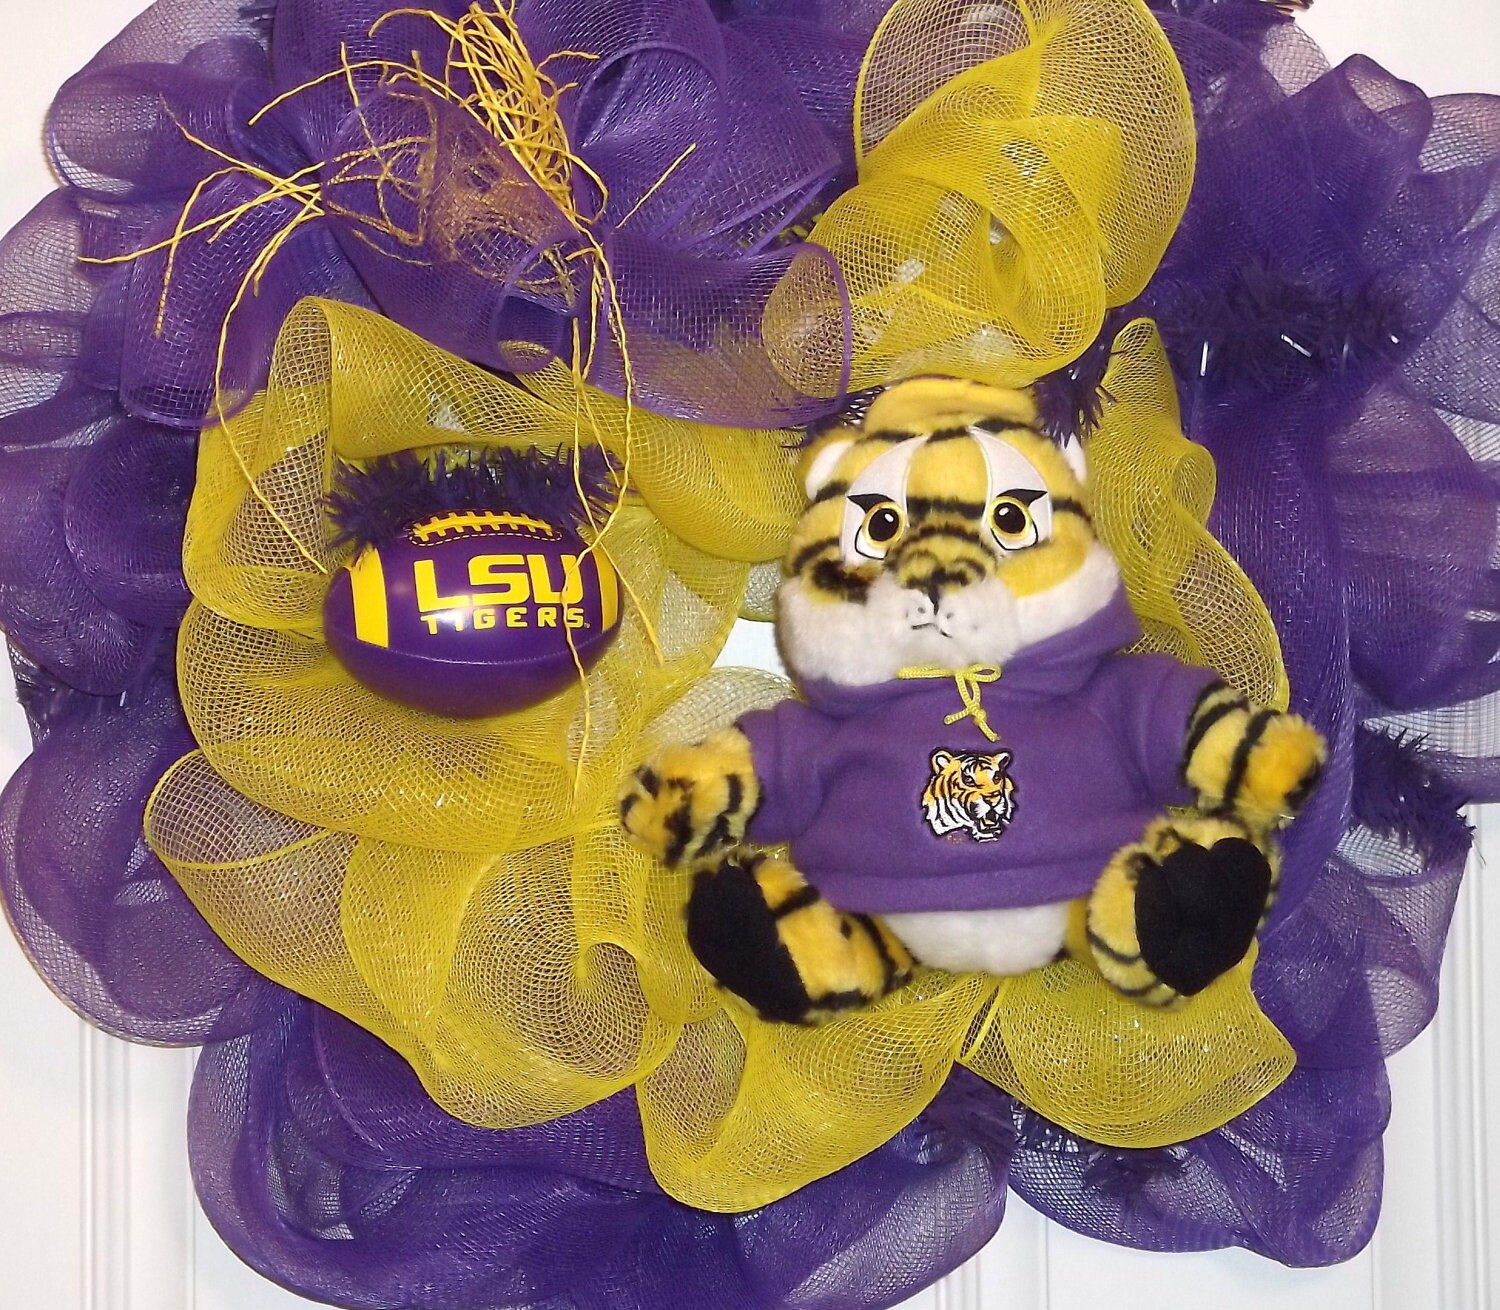 Items similar to LSU Purple and Gold Deco Mesh Wreath on Etsy